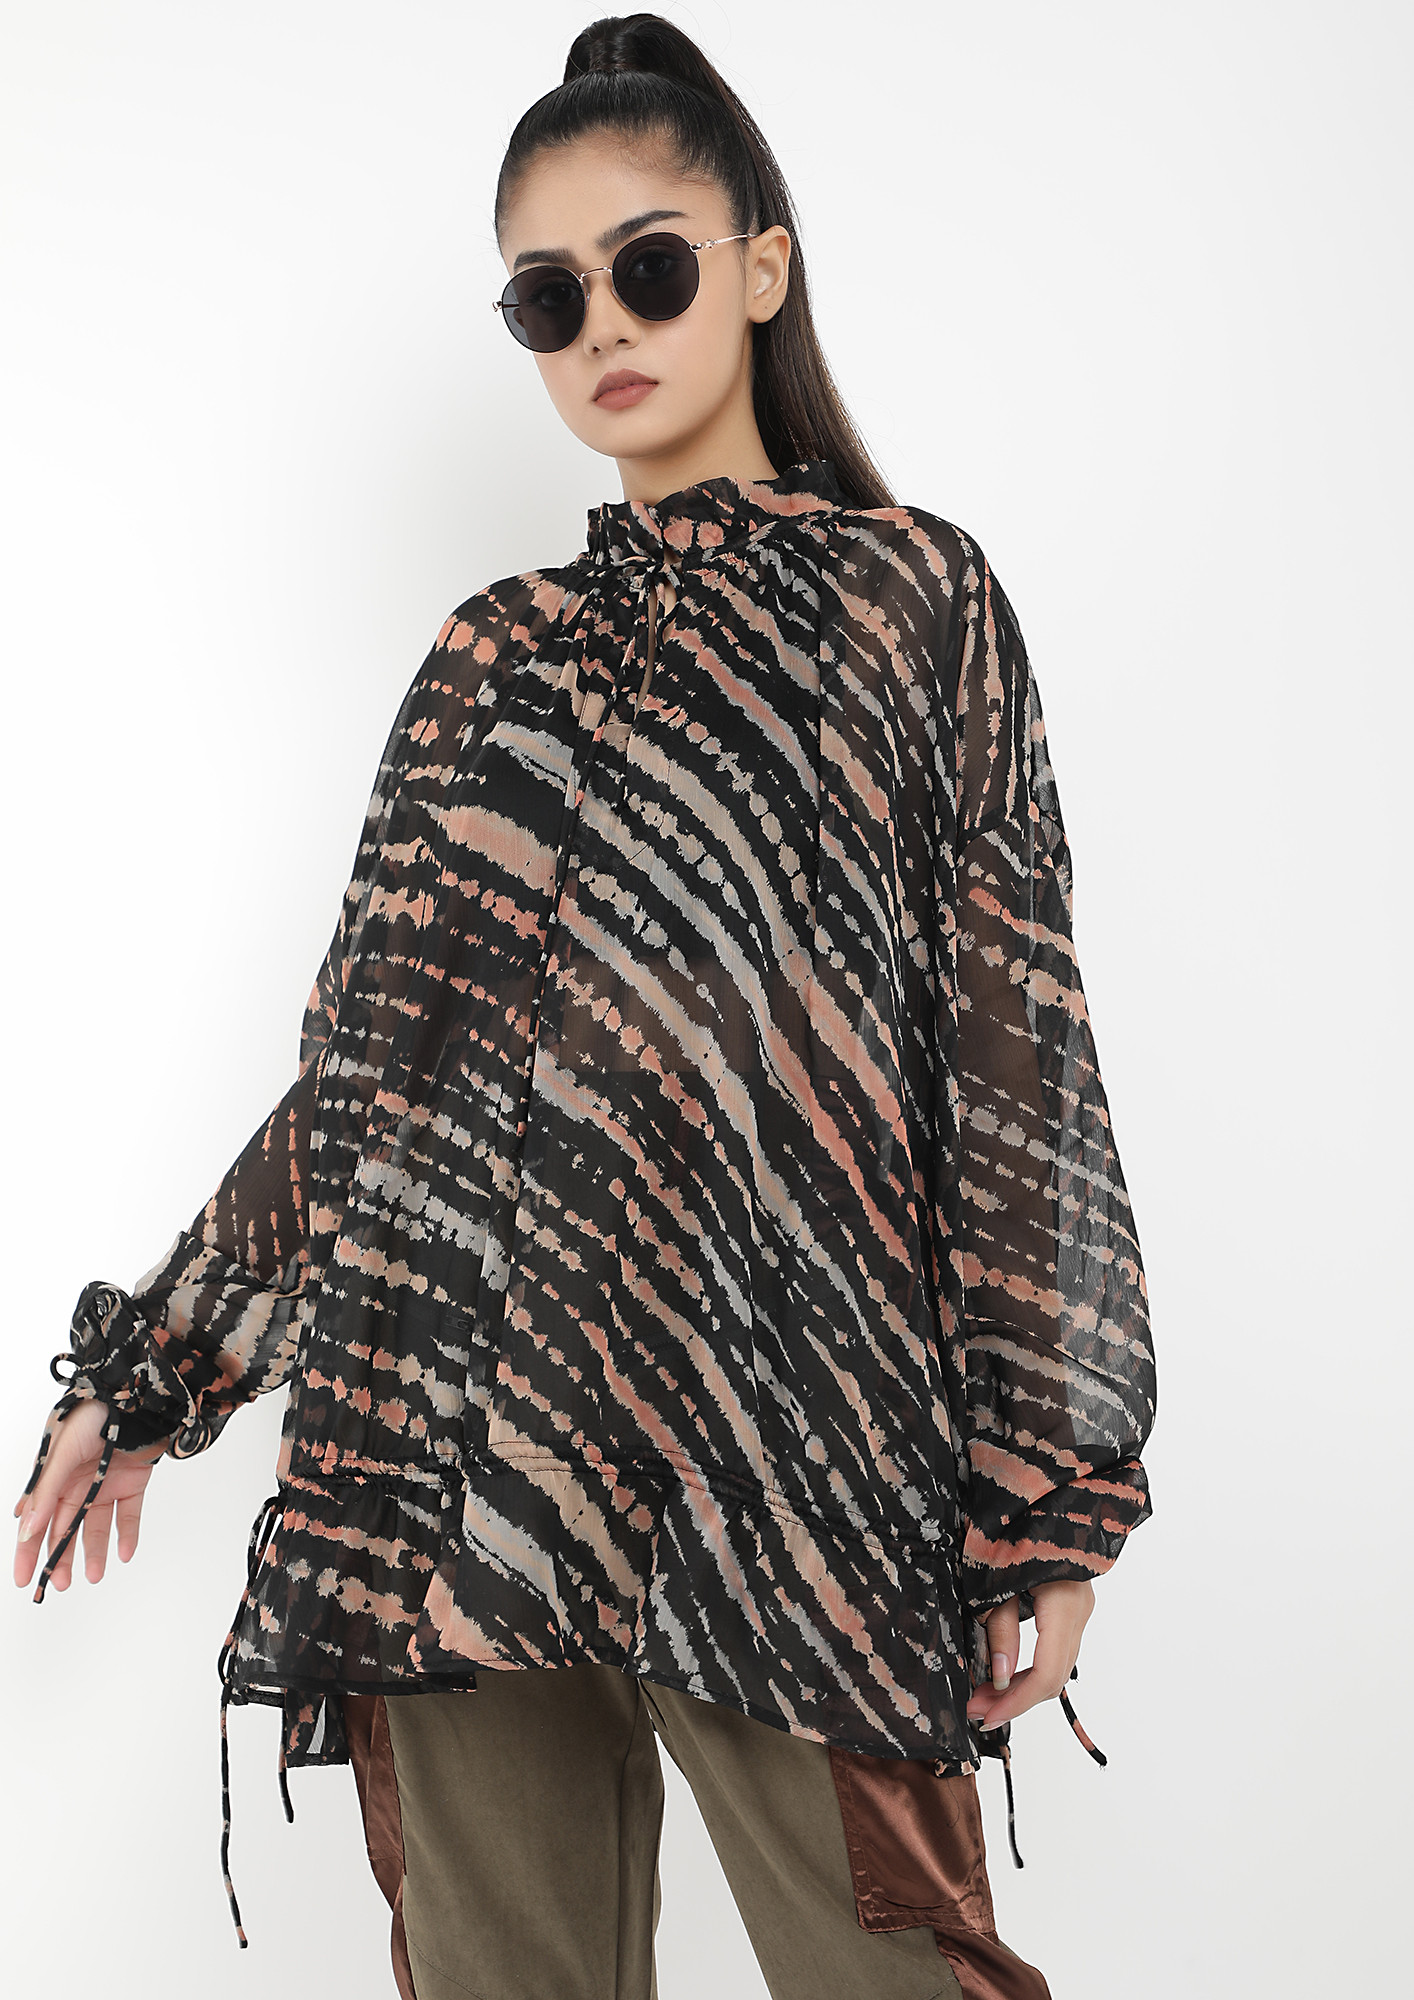 ALL OUT TO RELAX BLACK TUNIC TOP